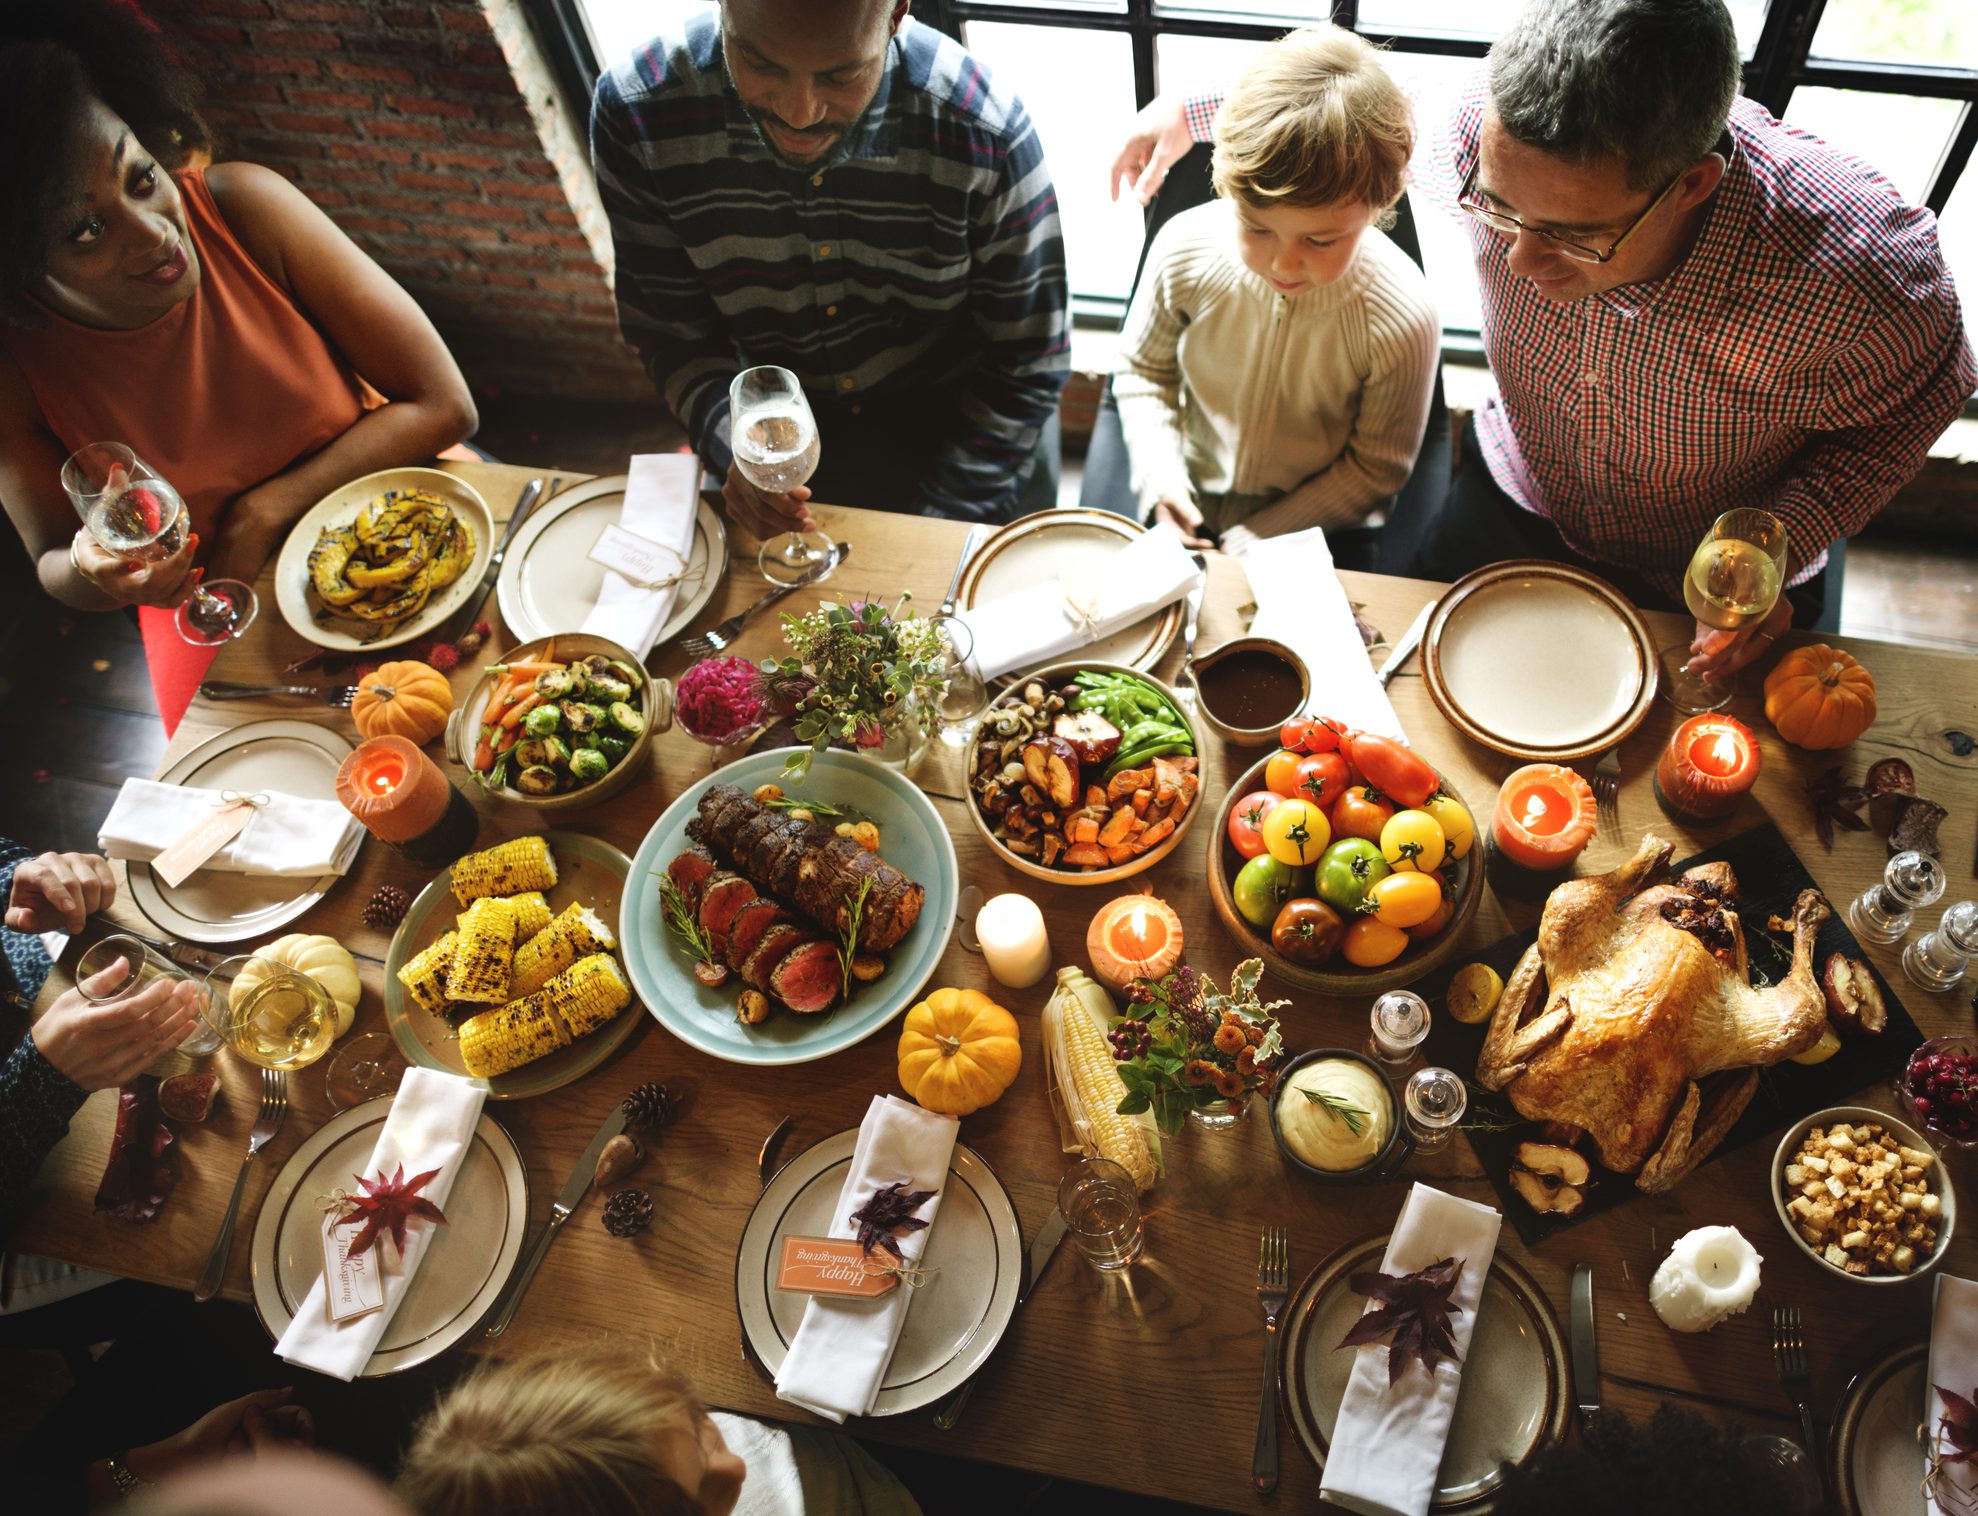 Family gathered around Thanksgiving table